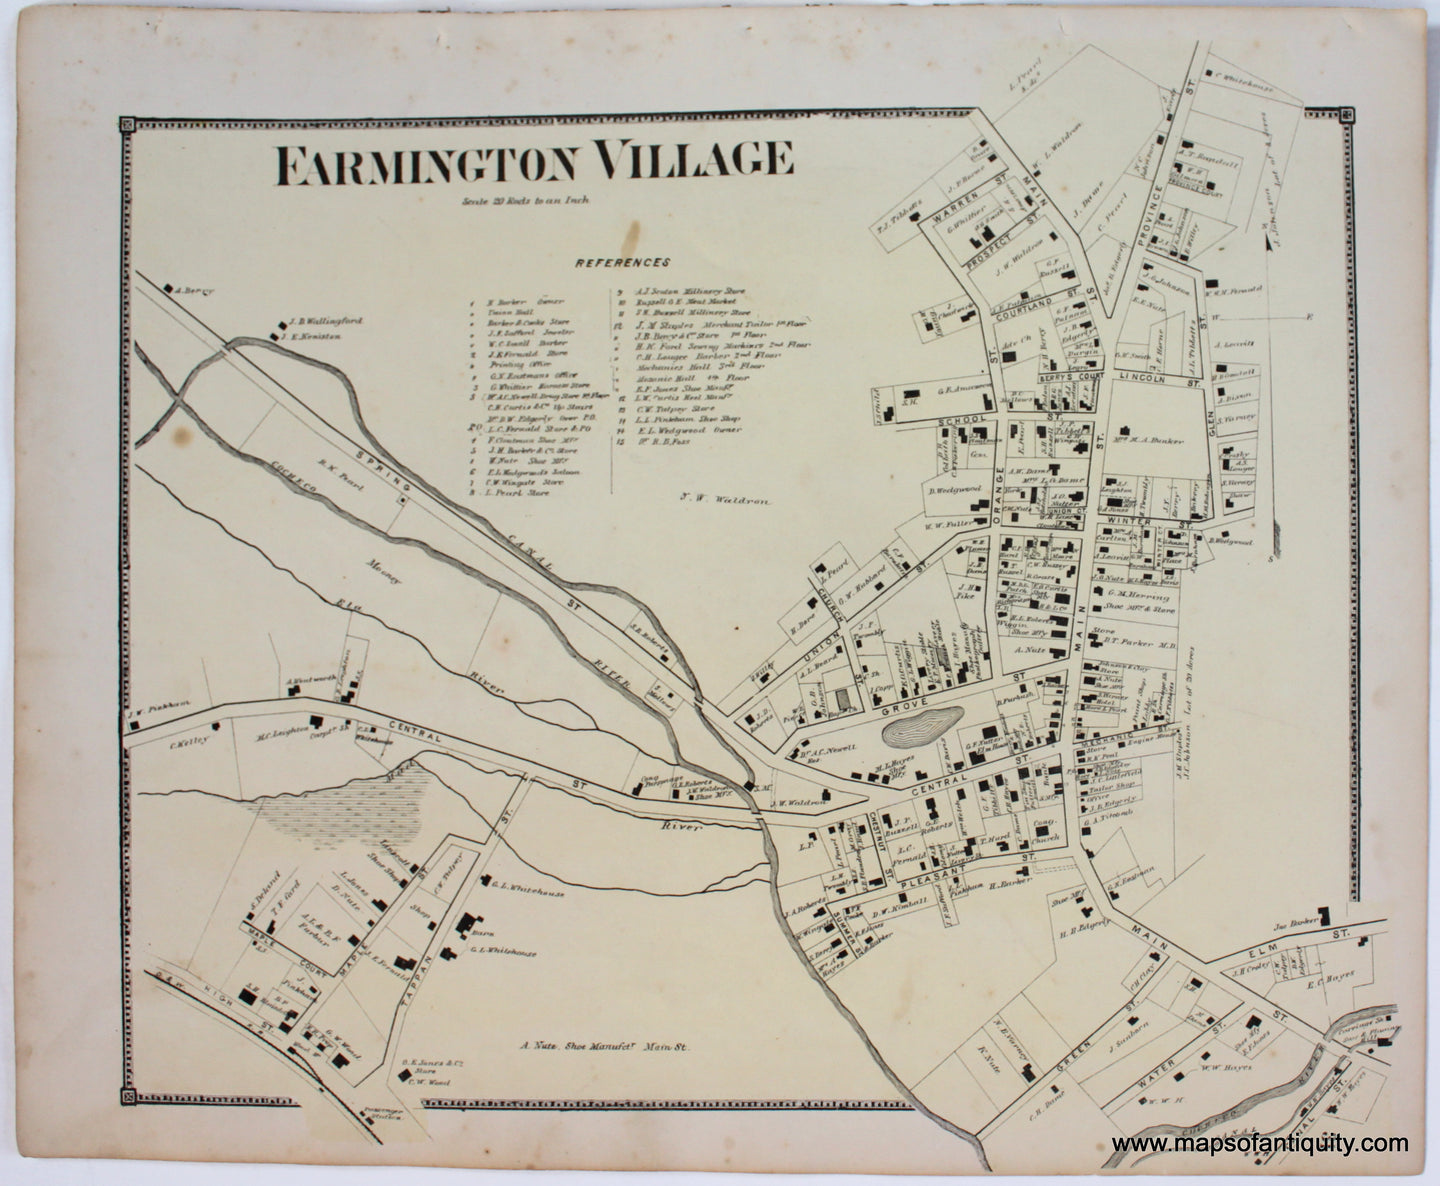 Antique-Map-Farmington-Village-Strafford-County-Town-Towns-New-Hampshire-NH-Sanford-Everts-1871-1870s-1800s-Mid-Late-19th-Century-Maps-of-Antiquity